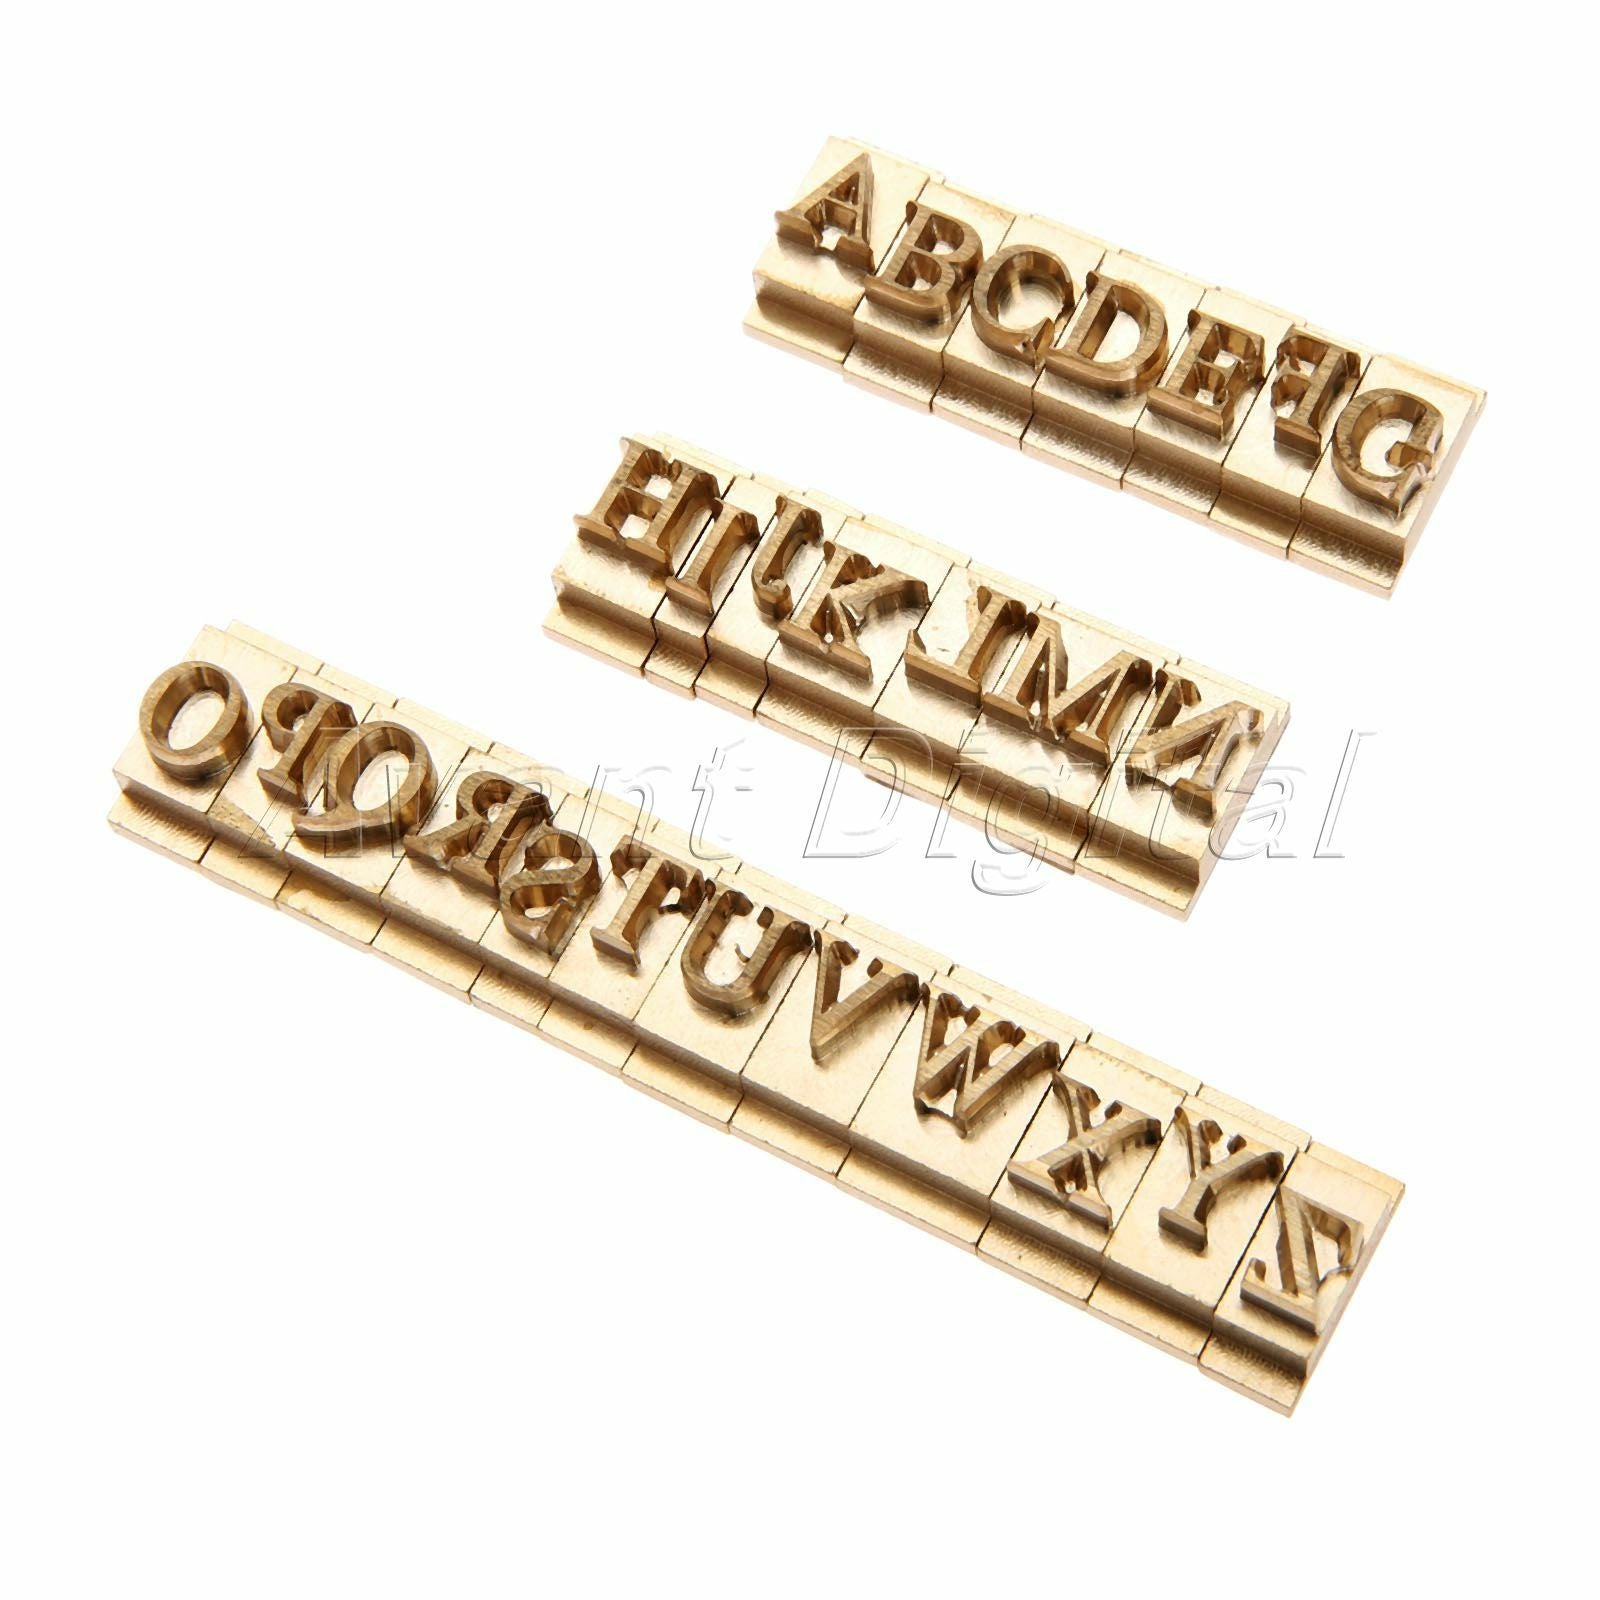 26Pcs Brass Alphabet Letters + Fixture Leather Stamp Carving Tool Branding Iron